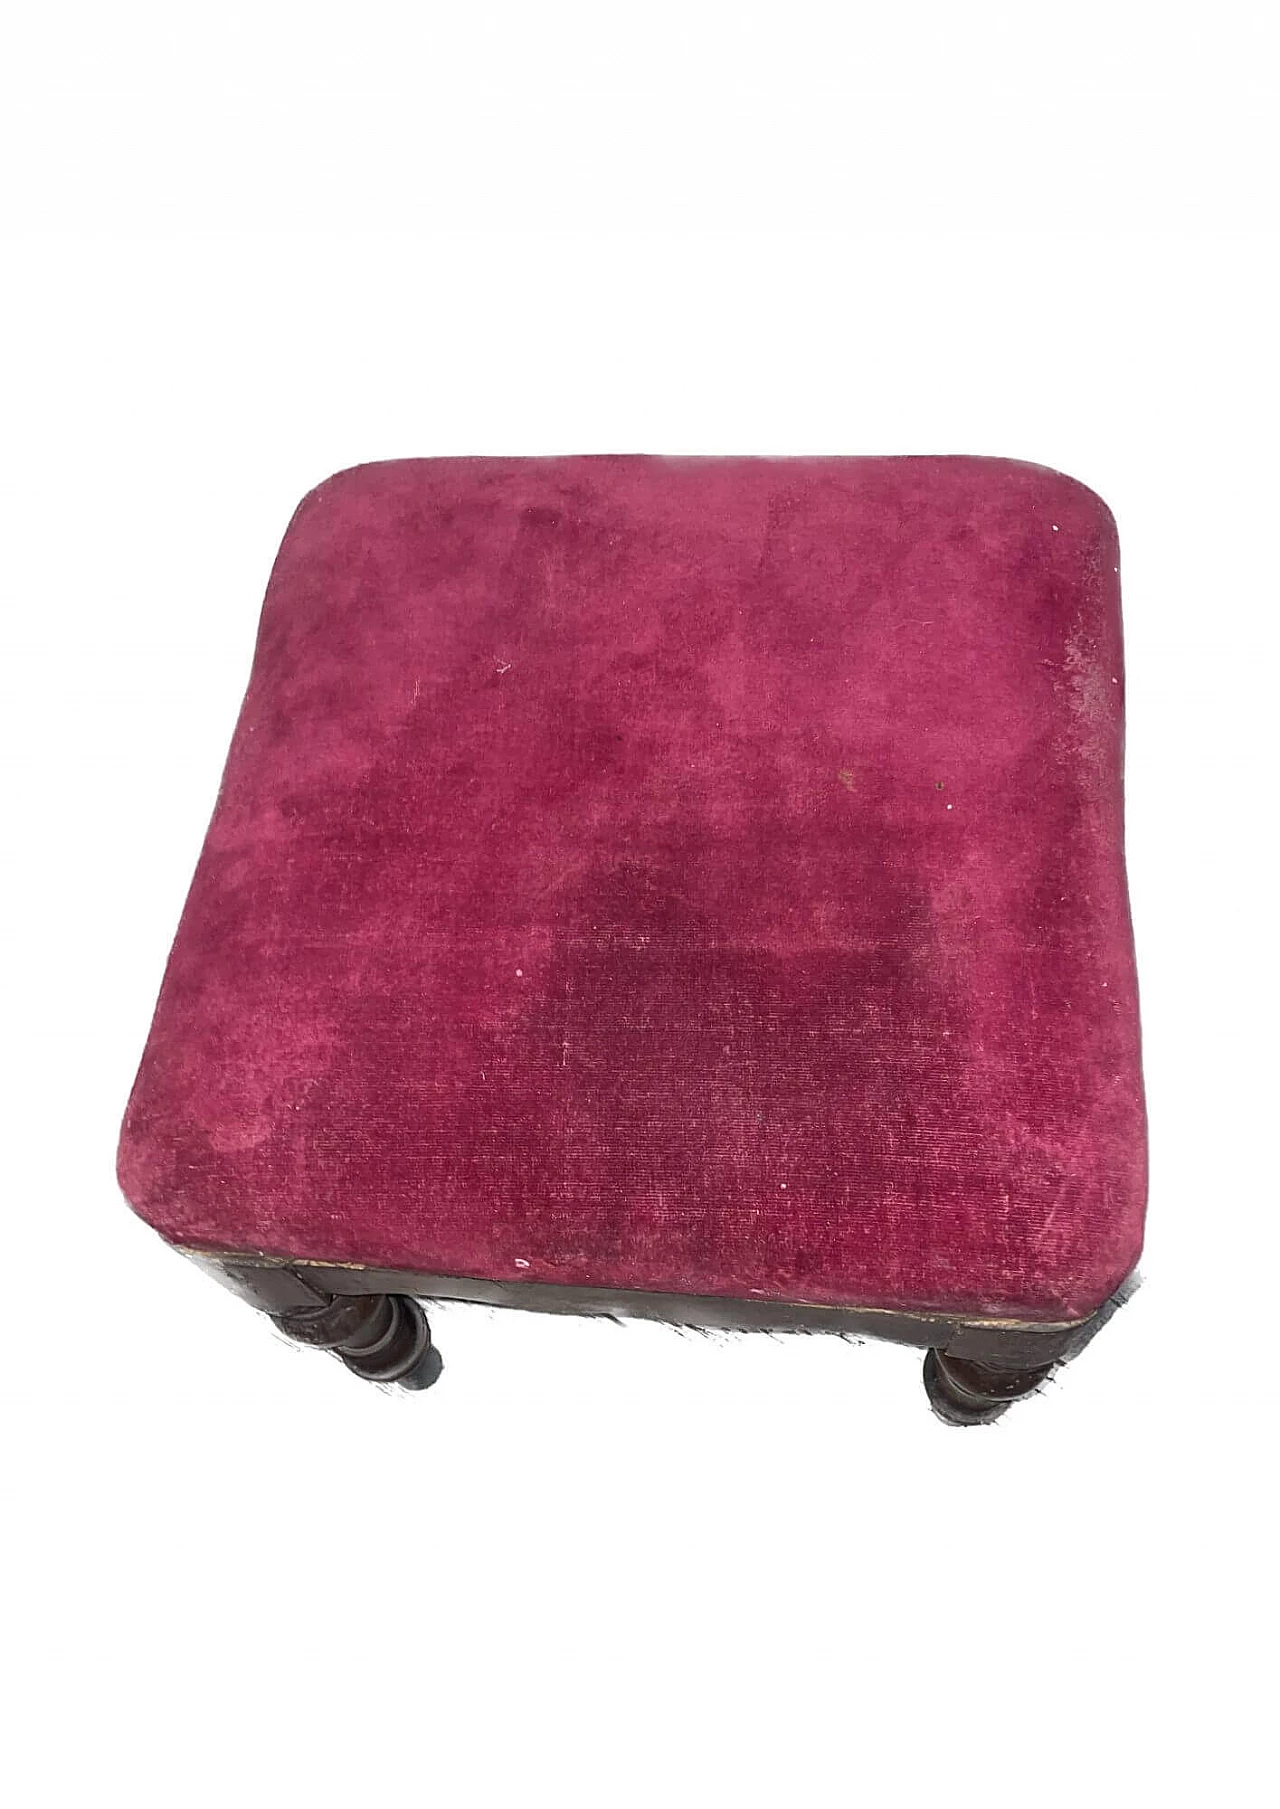 Wooden pouf with red velvet seat, early 20th century 8